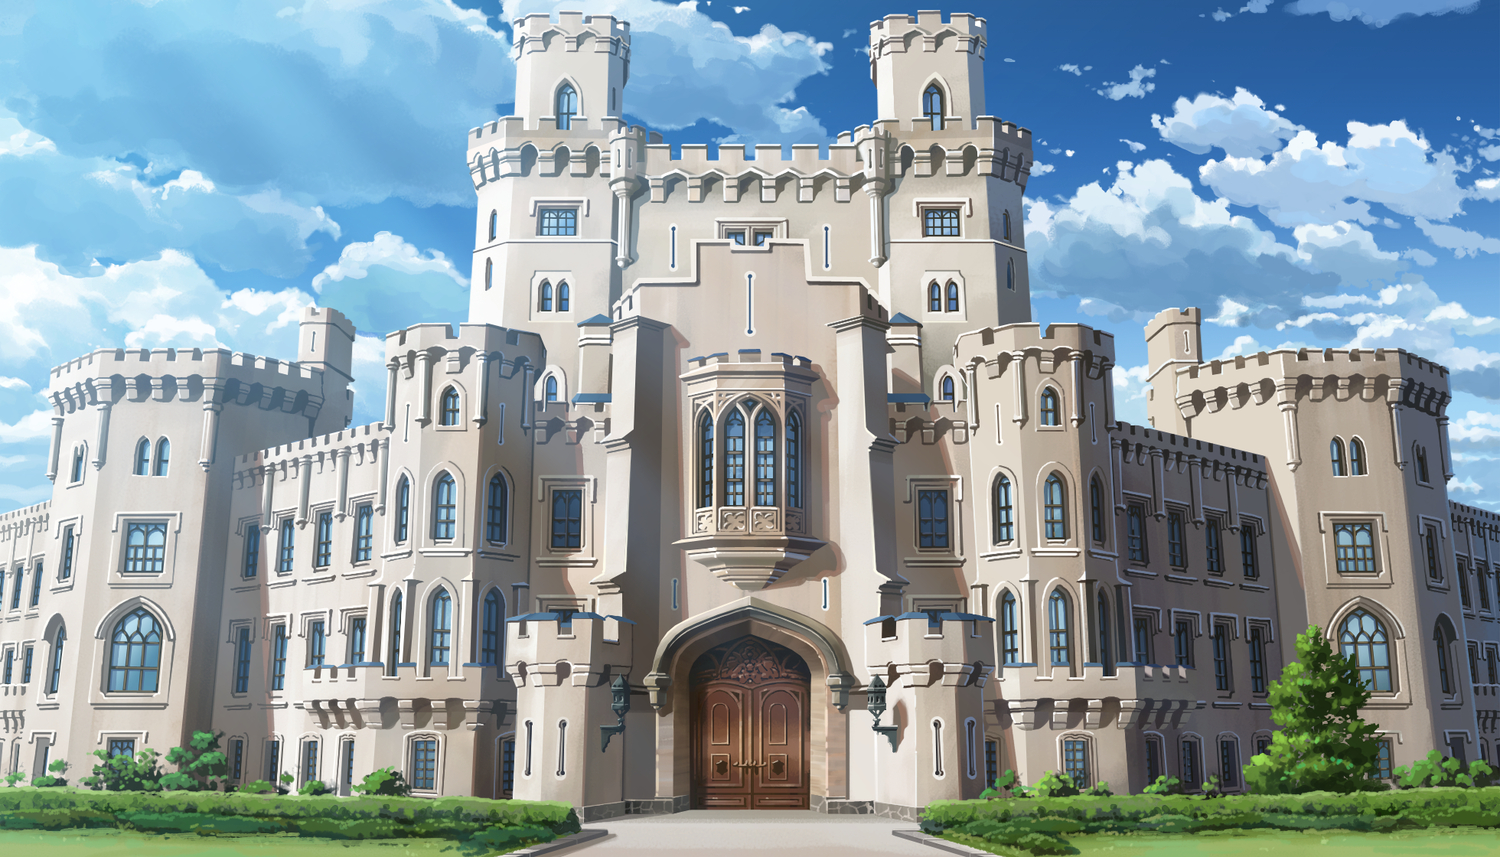 10 Best Anime Set In Gothic Castles